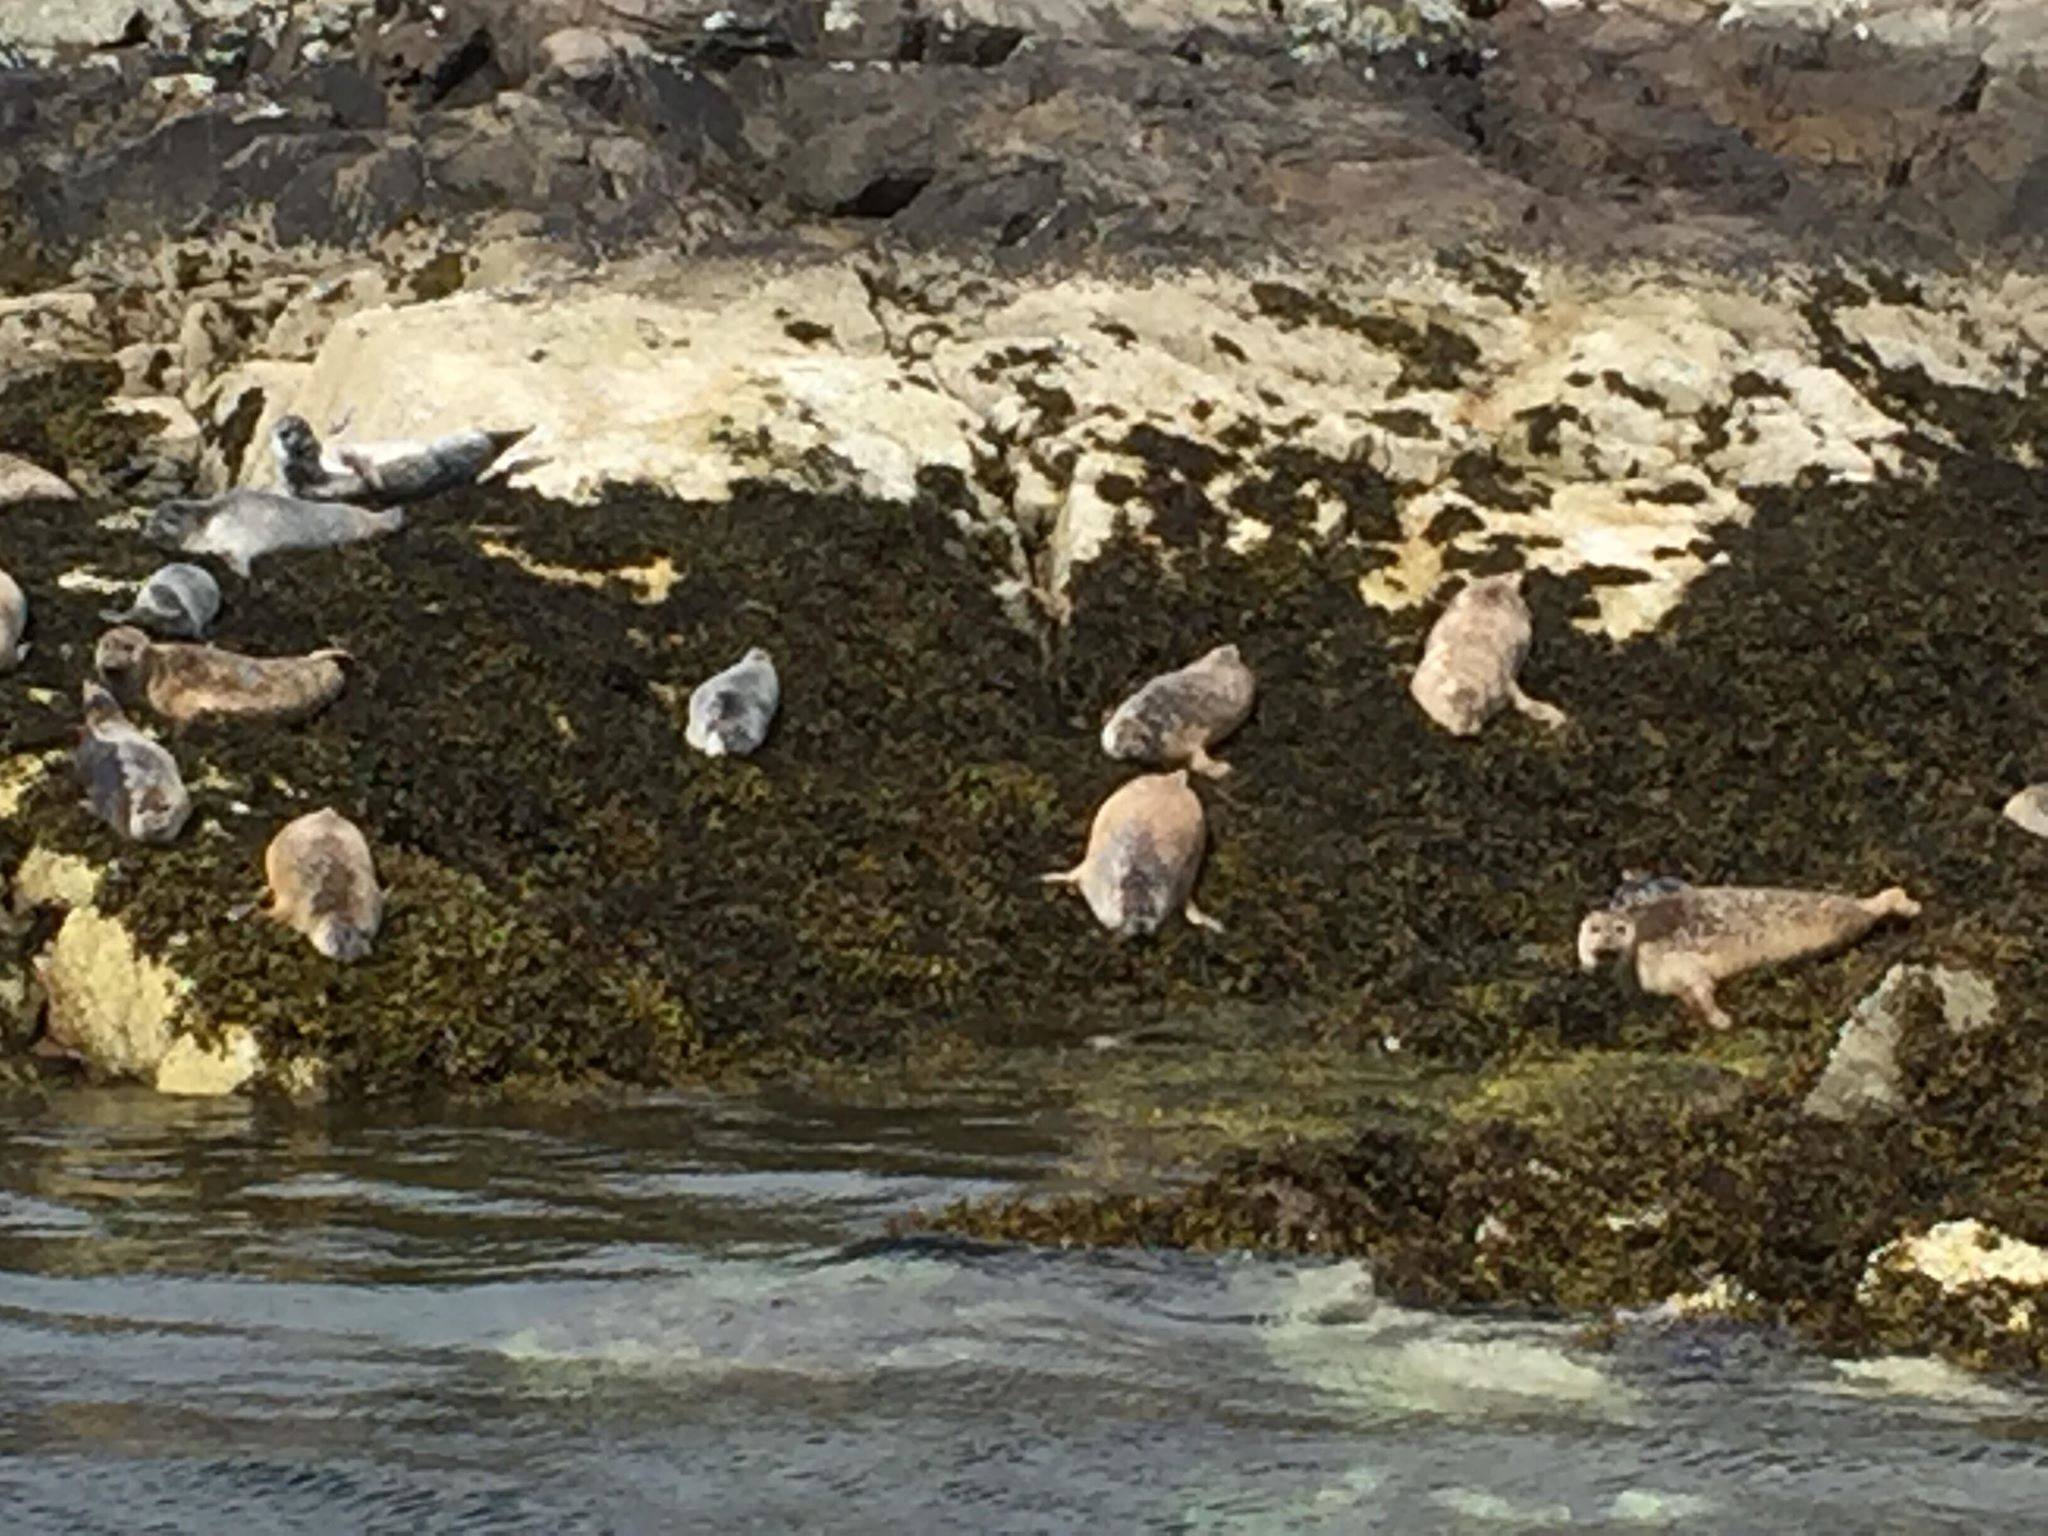 More of the locals at Sandaig...